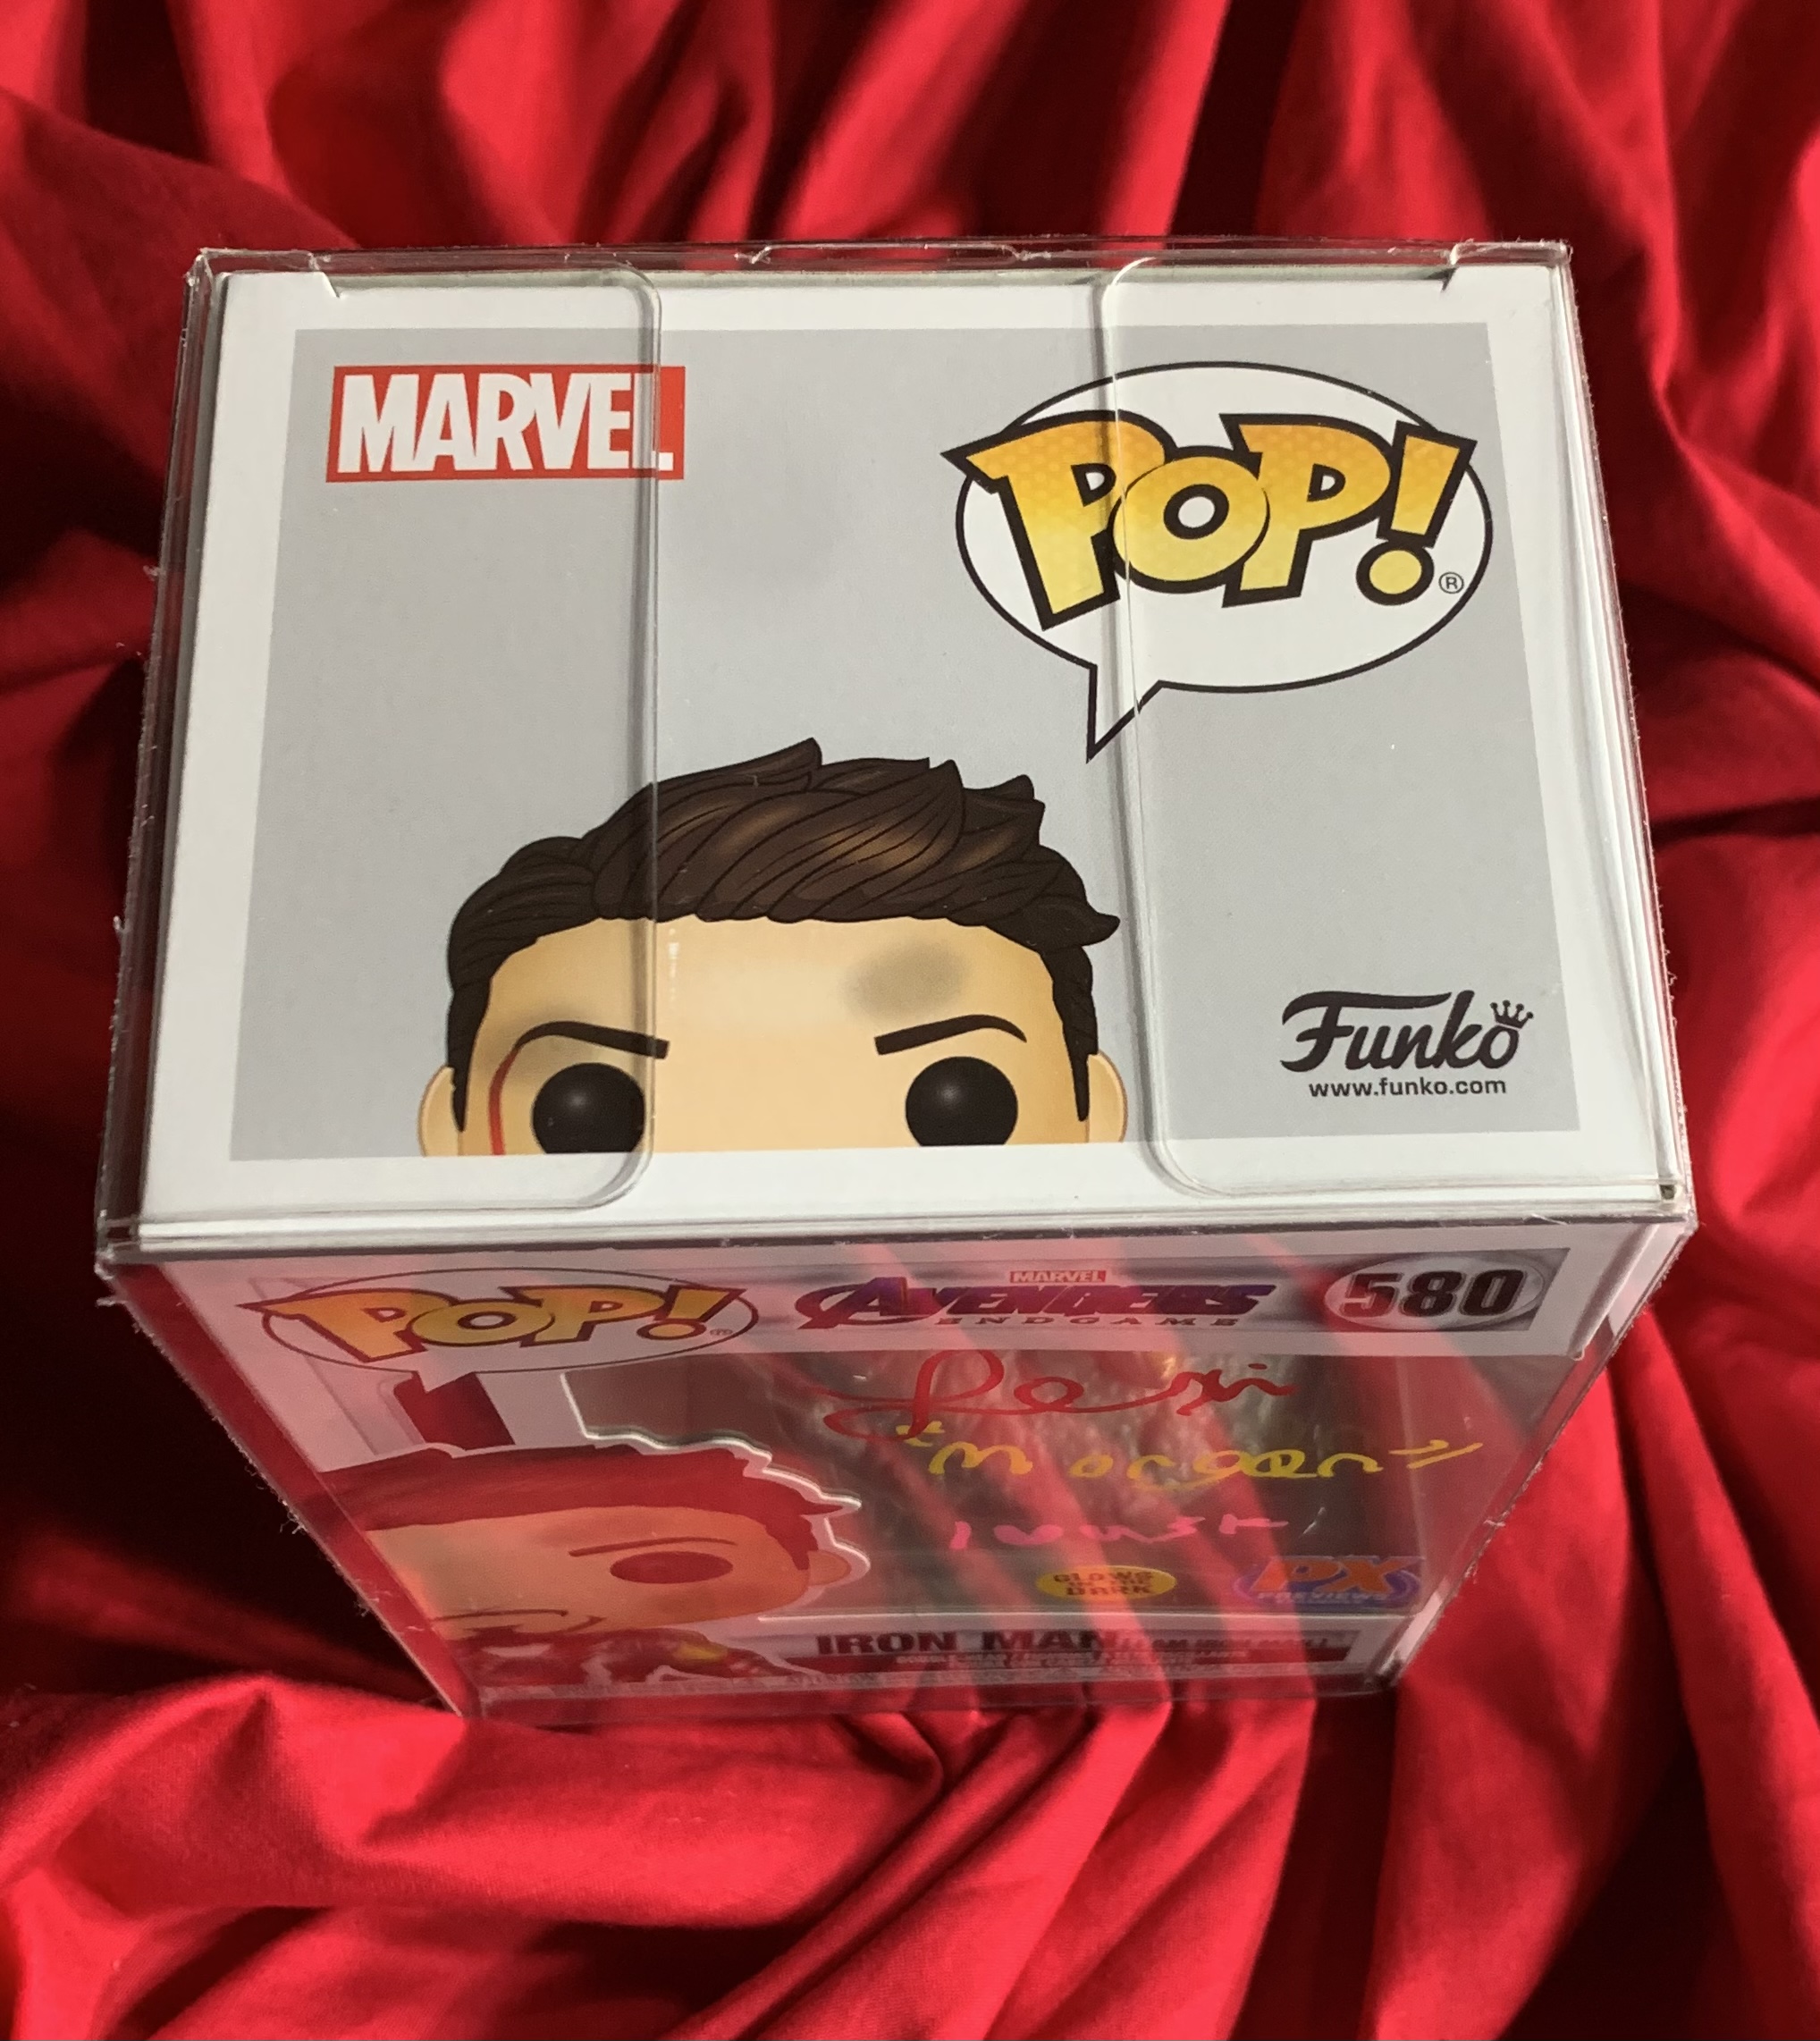 Avengers Endgame~Iron Man (I am Iron Man)~Funko Pop #580 (PX glow in the  dark edition)~Signed by Lexi Rabe with “Morgan” and quote “I love (heart)  you 3k.” Includes JSA COA and USA